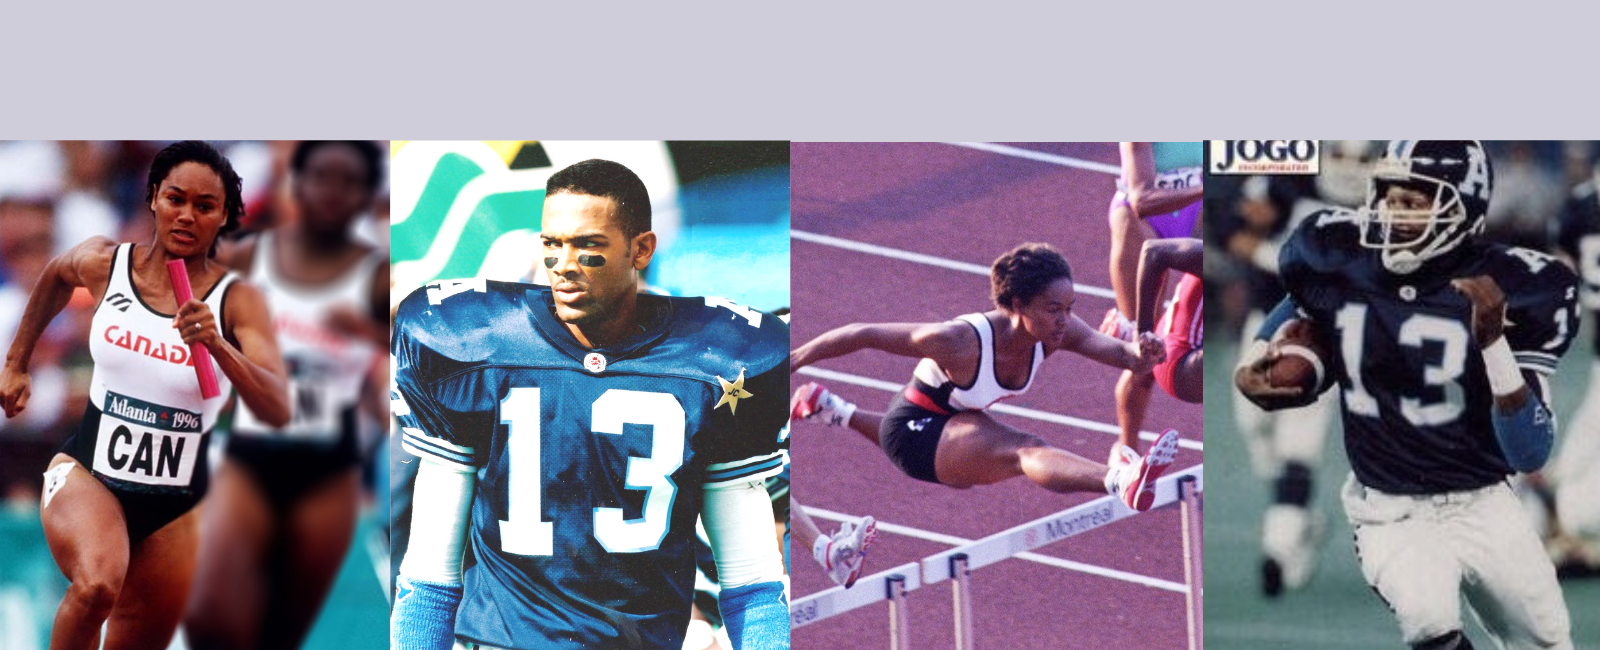 A collage of 4 images, one of Lesley Williams running at the Olympics, one of Taly Williams up close, one of Lesley running the hurdles and 1 of Taly at a Tie-cats game.